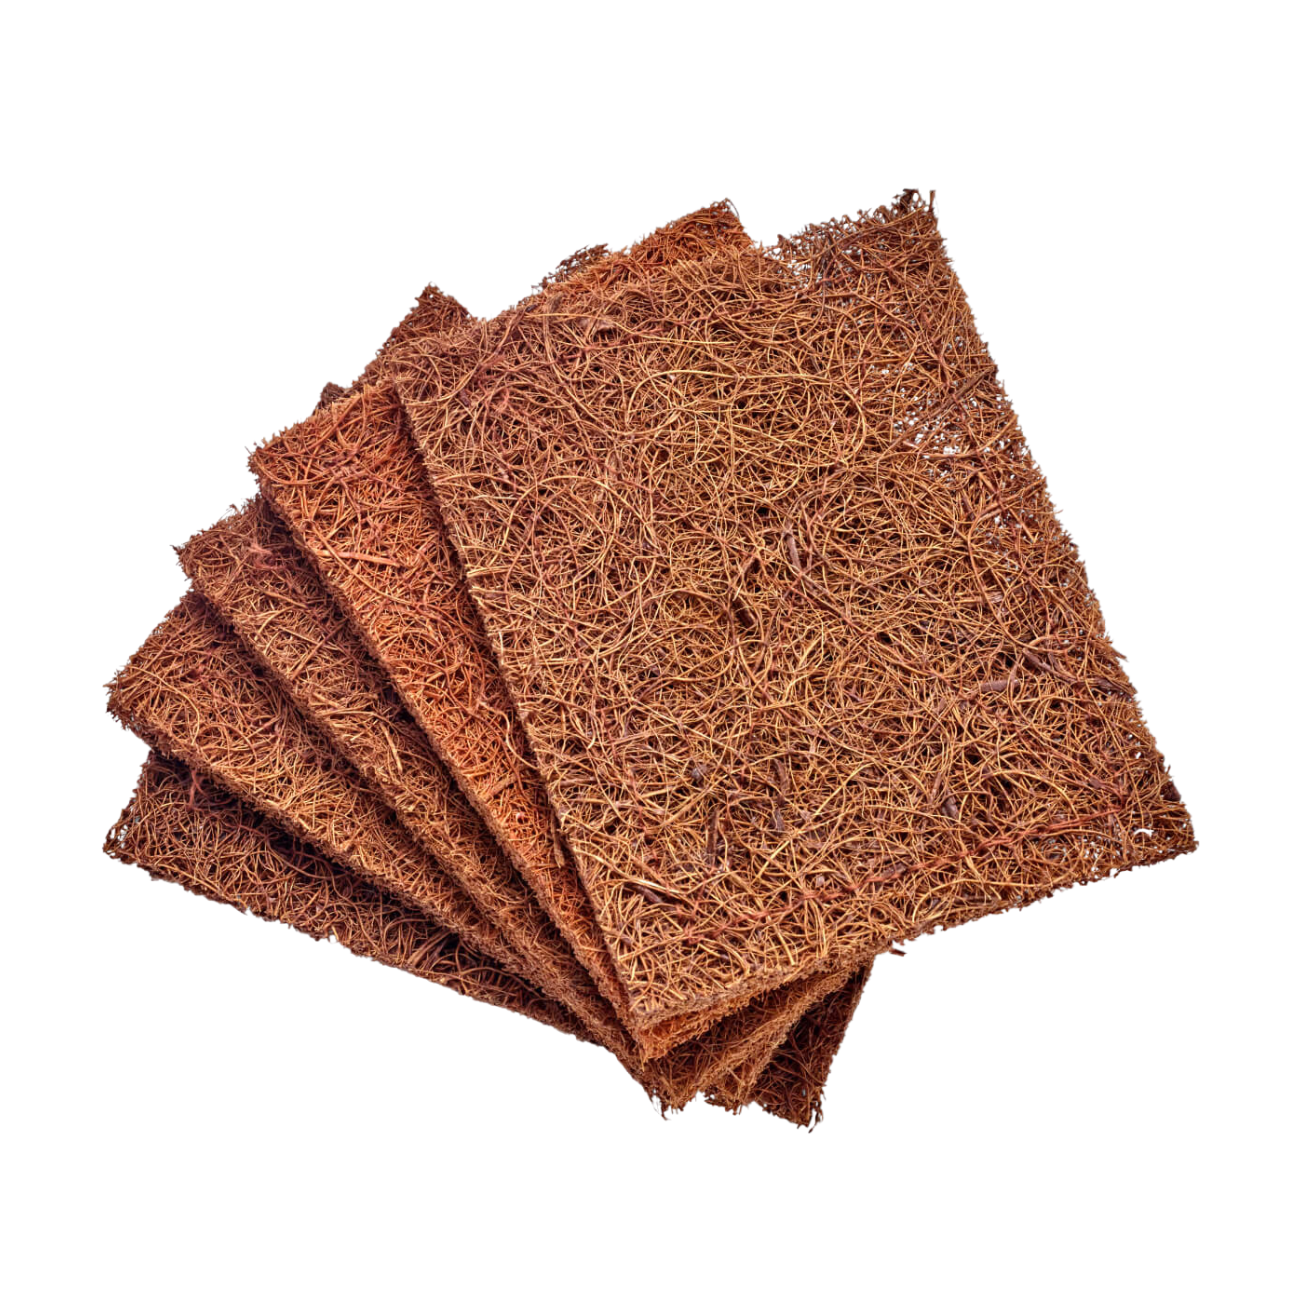 Biodegradable Coconut Kitchen Scourers Pack of 5